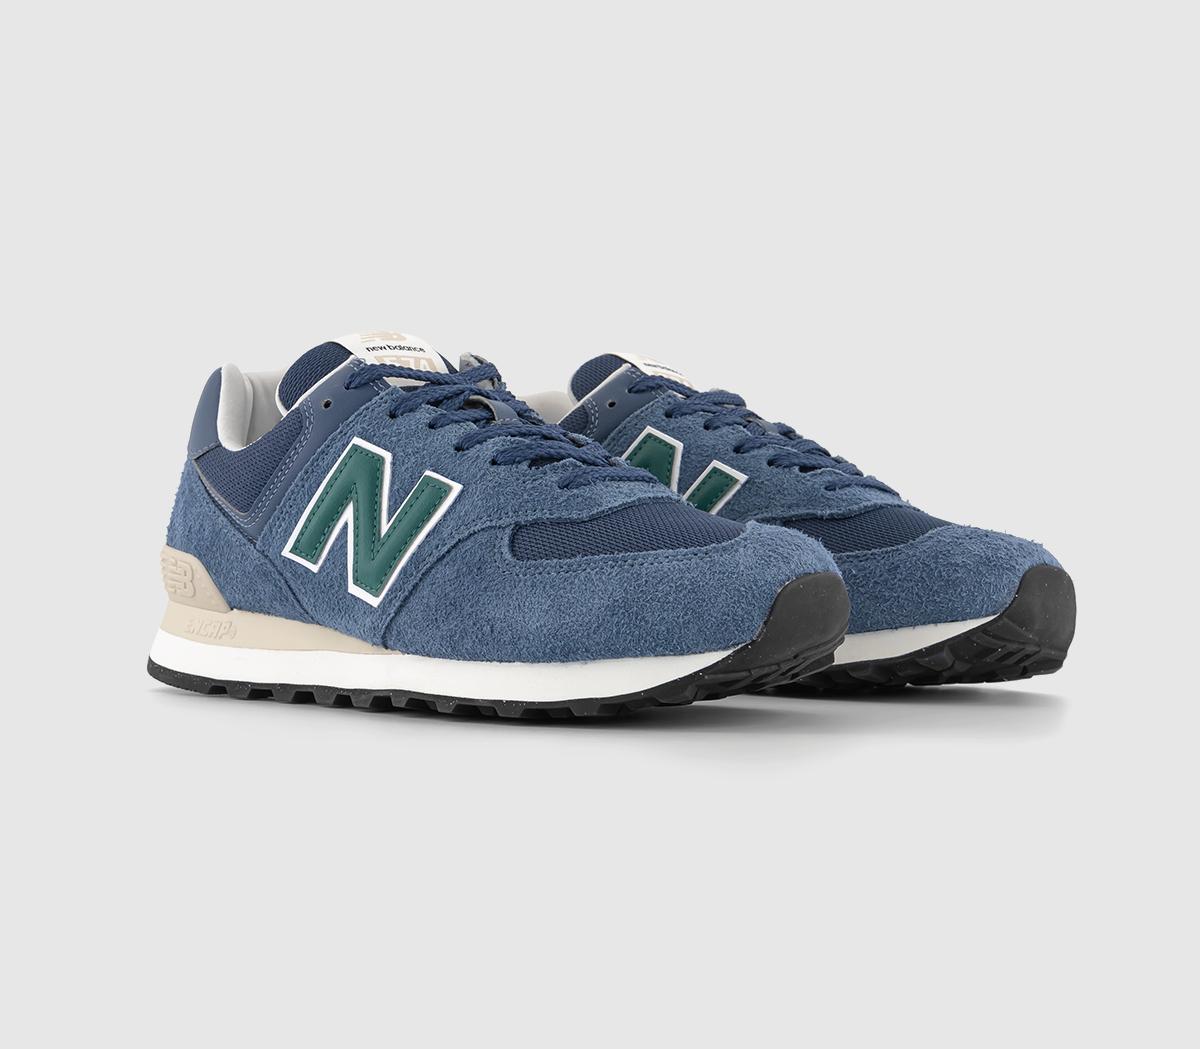 New Balance 574 Trainers Blue Navy Green, 10